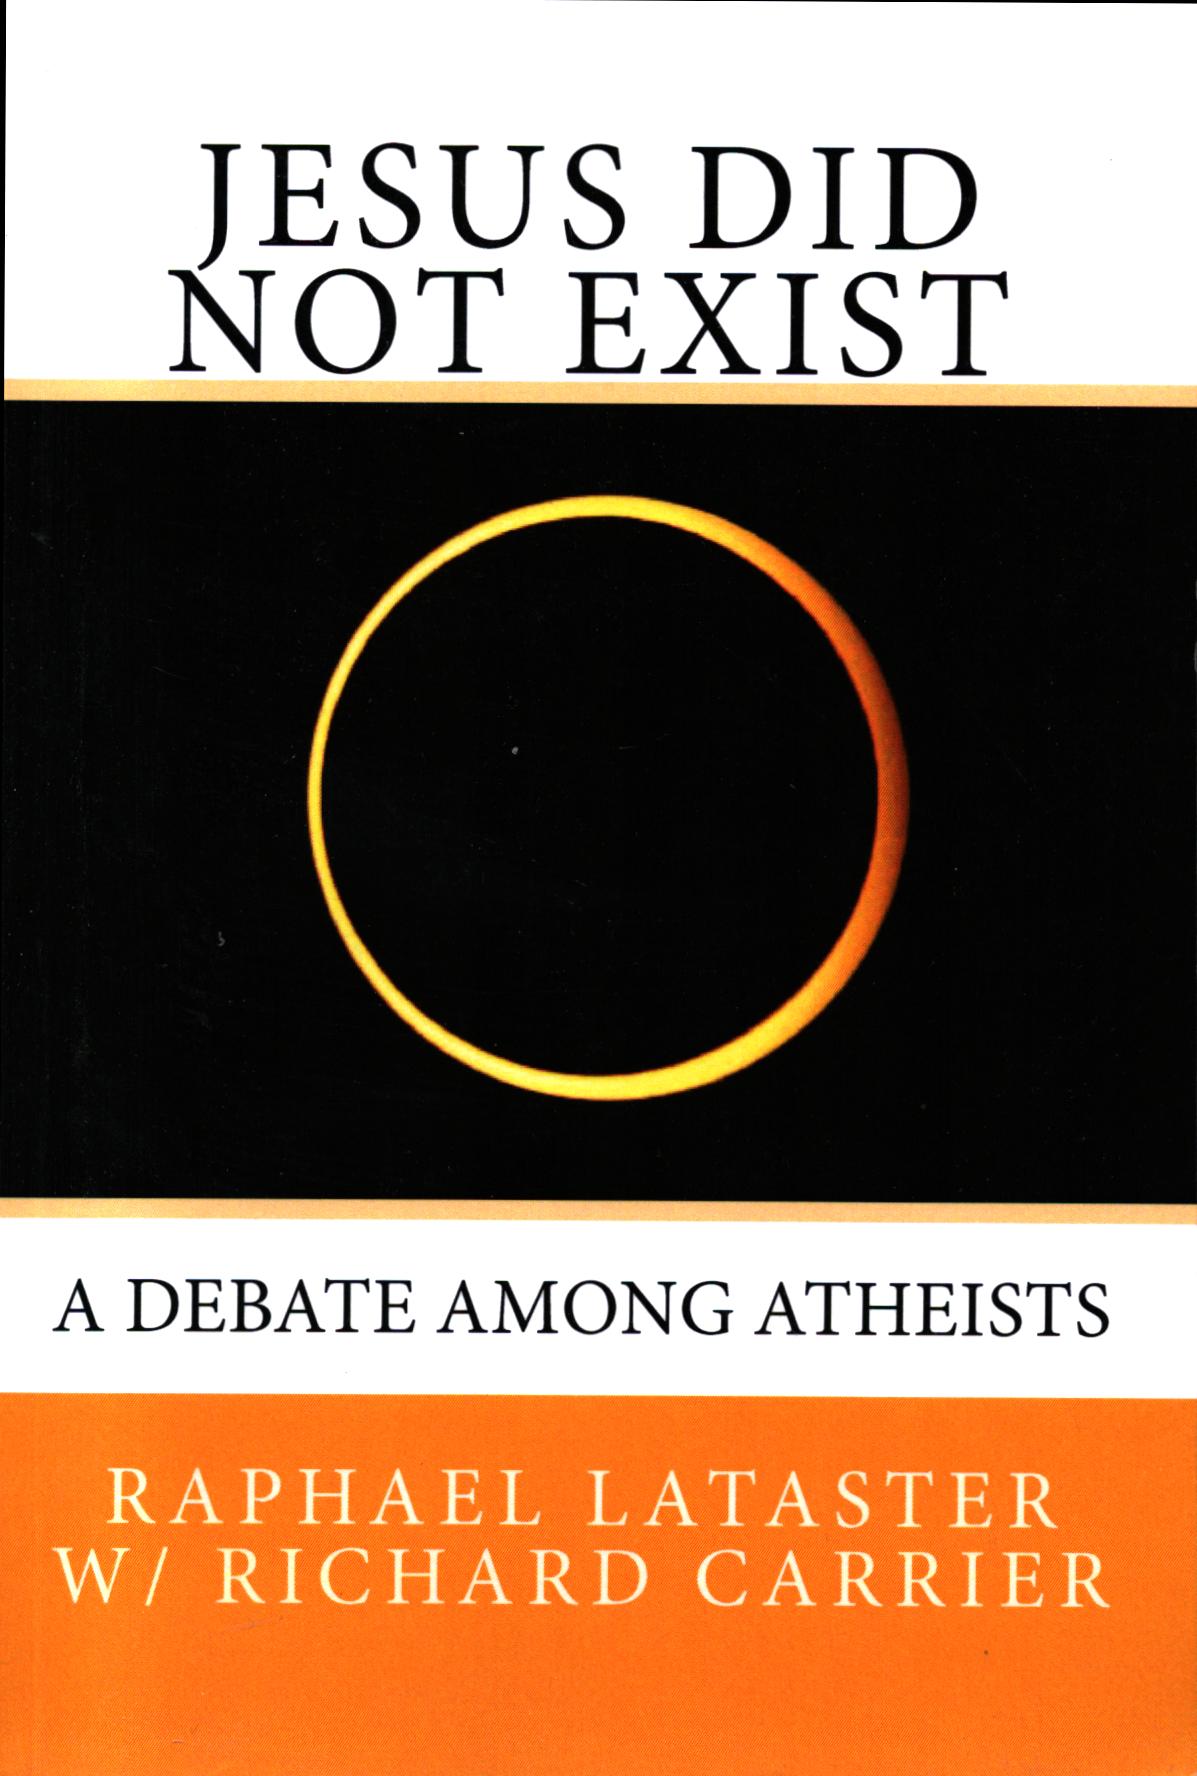 Jesus Did Not Exist : A Debate Among Atheists - Raphael Lataster - Richard Carrier